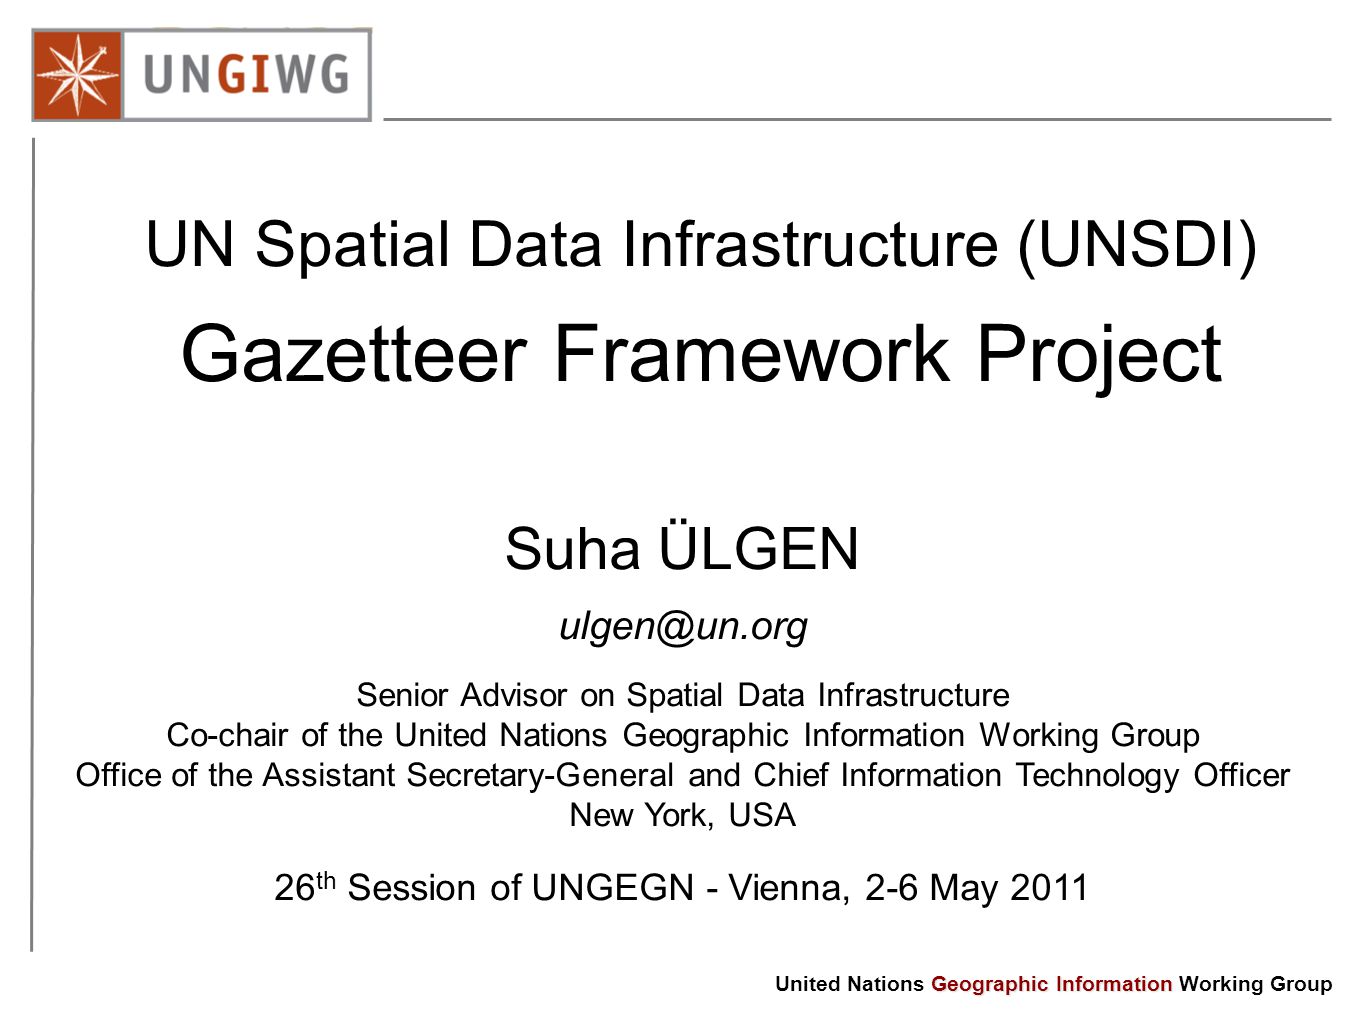 Geographic Information United Nations Geographic Information Working Group UN Spatial Data Infrastructure (UNSDI) Gazetteer Framework Project Suha ÜLGEN Senior Advisor on Spatial Data Infrastructure Co-chair of the United Nations Geographic Information Working Group Office of the Assistant Secretary-General and Chief Information Technology Officer New York, USA 26 th Session of UNGEGN - Vienna, 2-6 May 2011